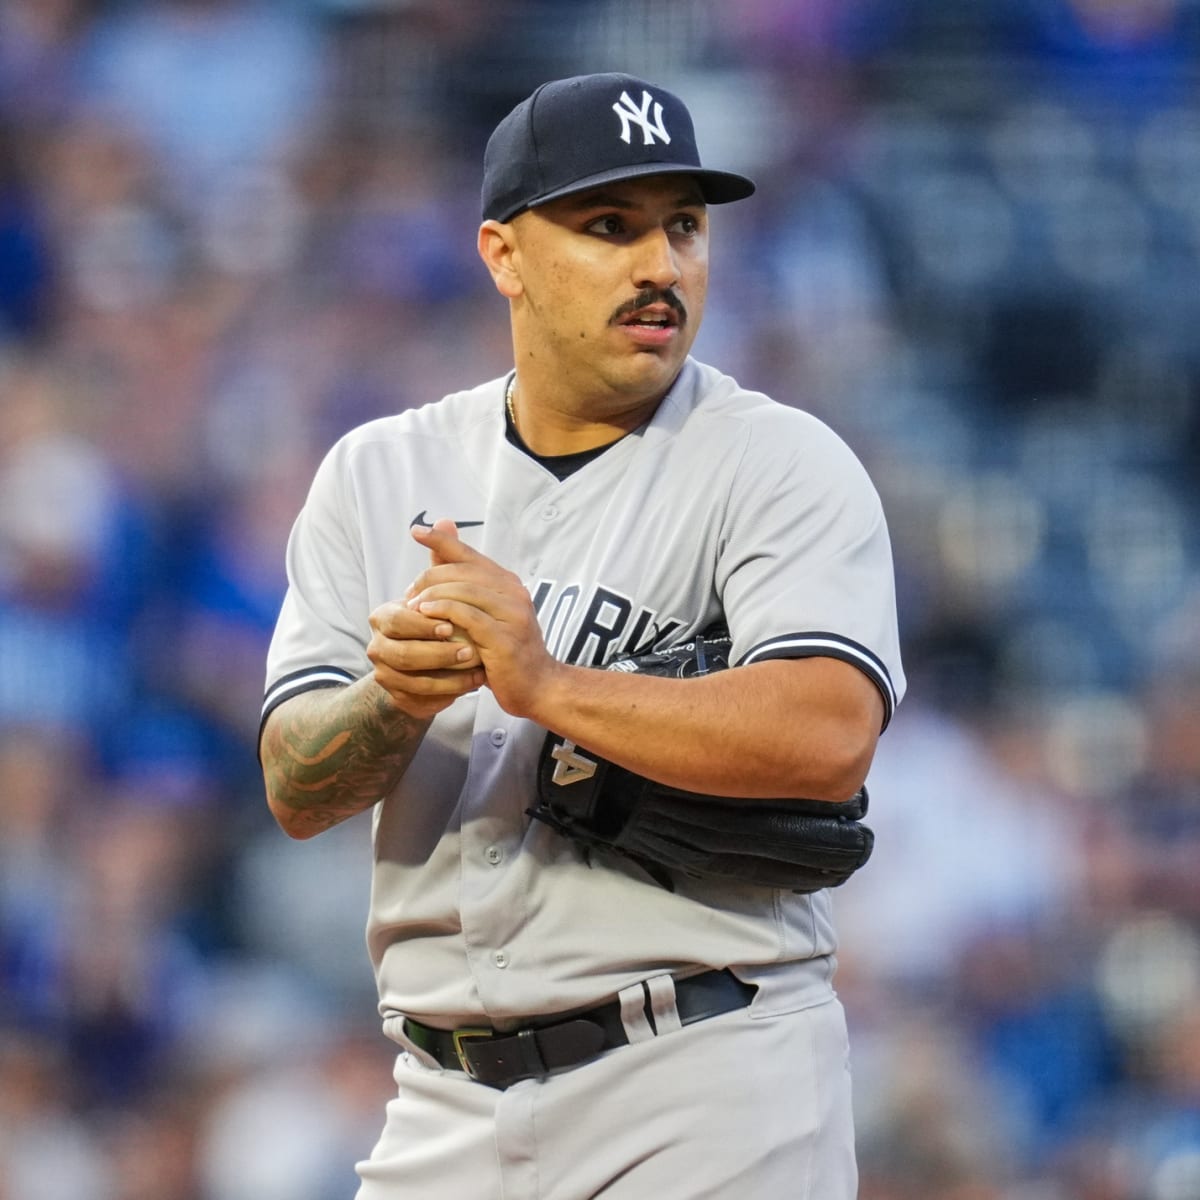 MLB Insider Predicts These New York Yankees Will Make 2022 MLB All